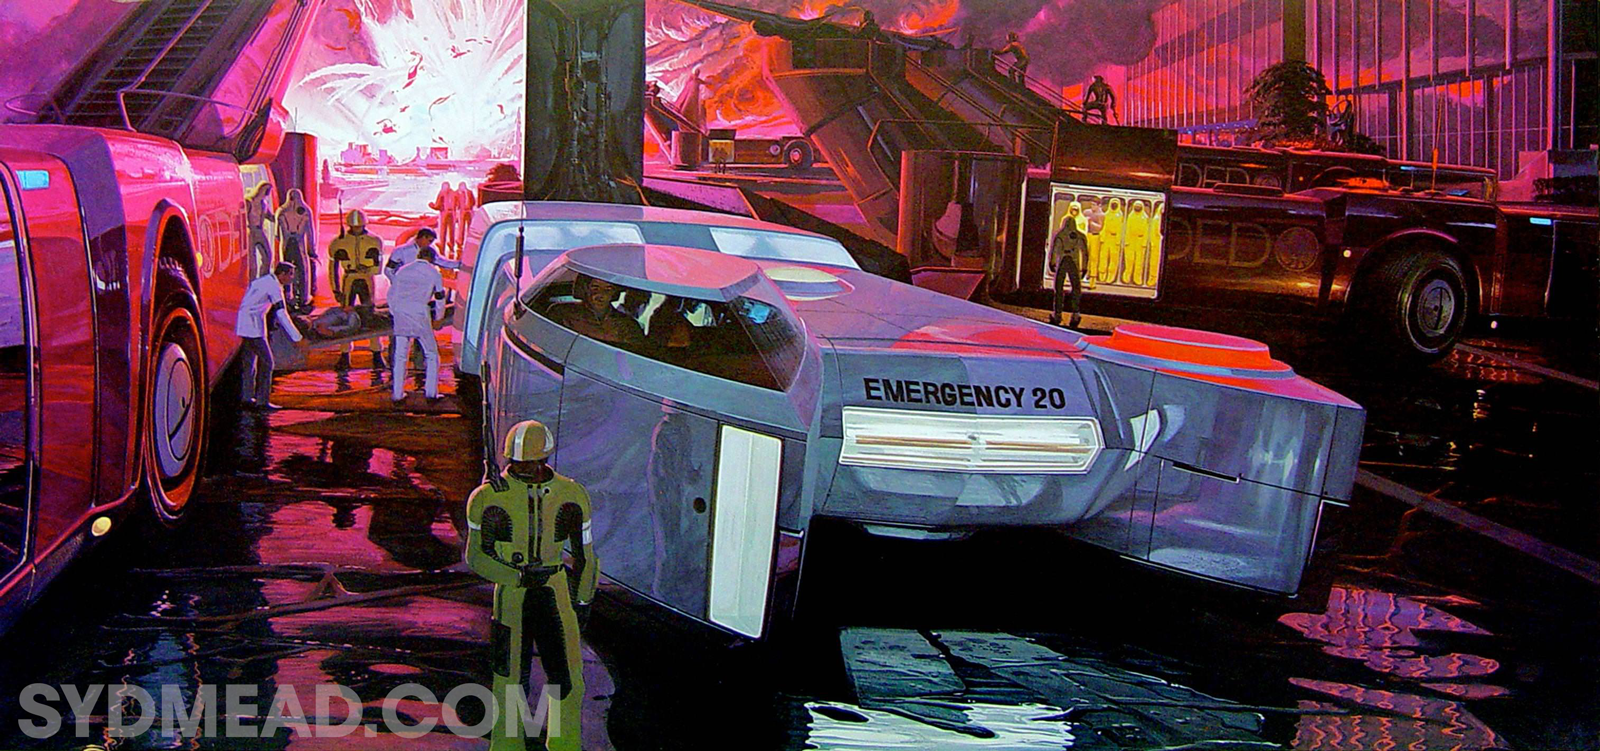 An homage to Syd Mead, the visual futurist behind Blade Runner